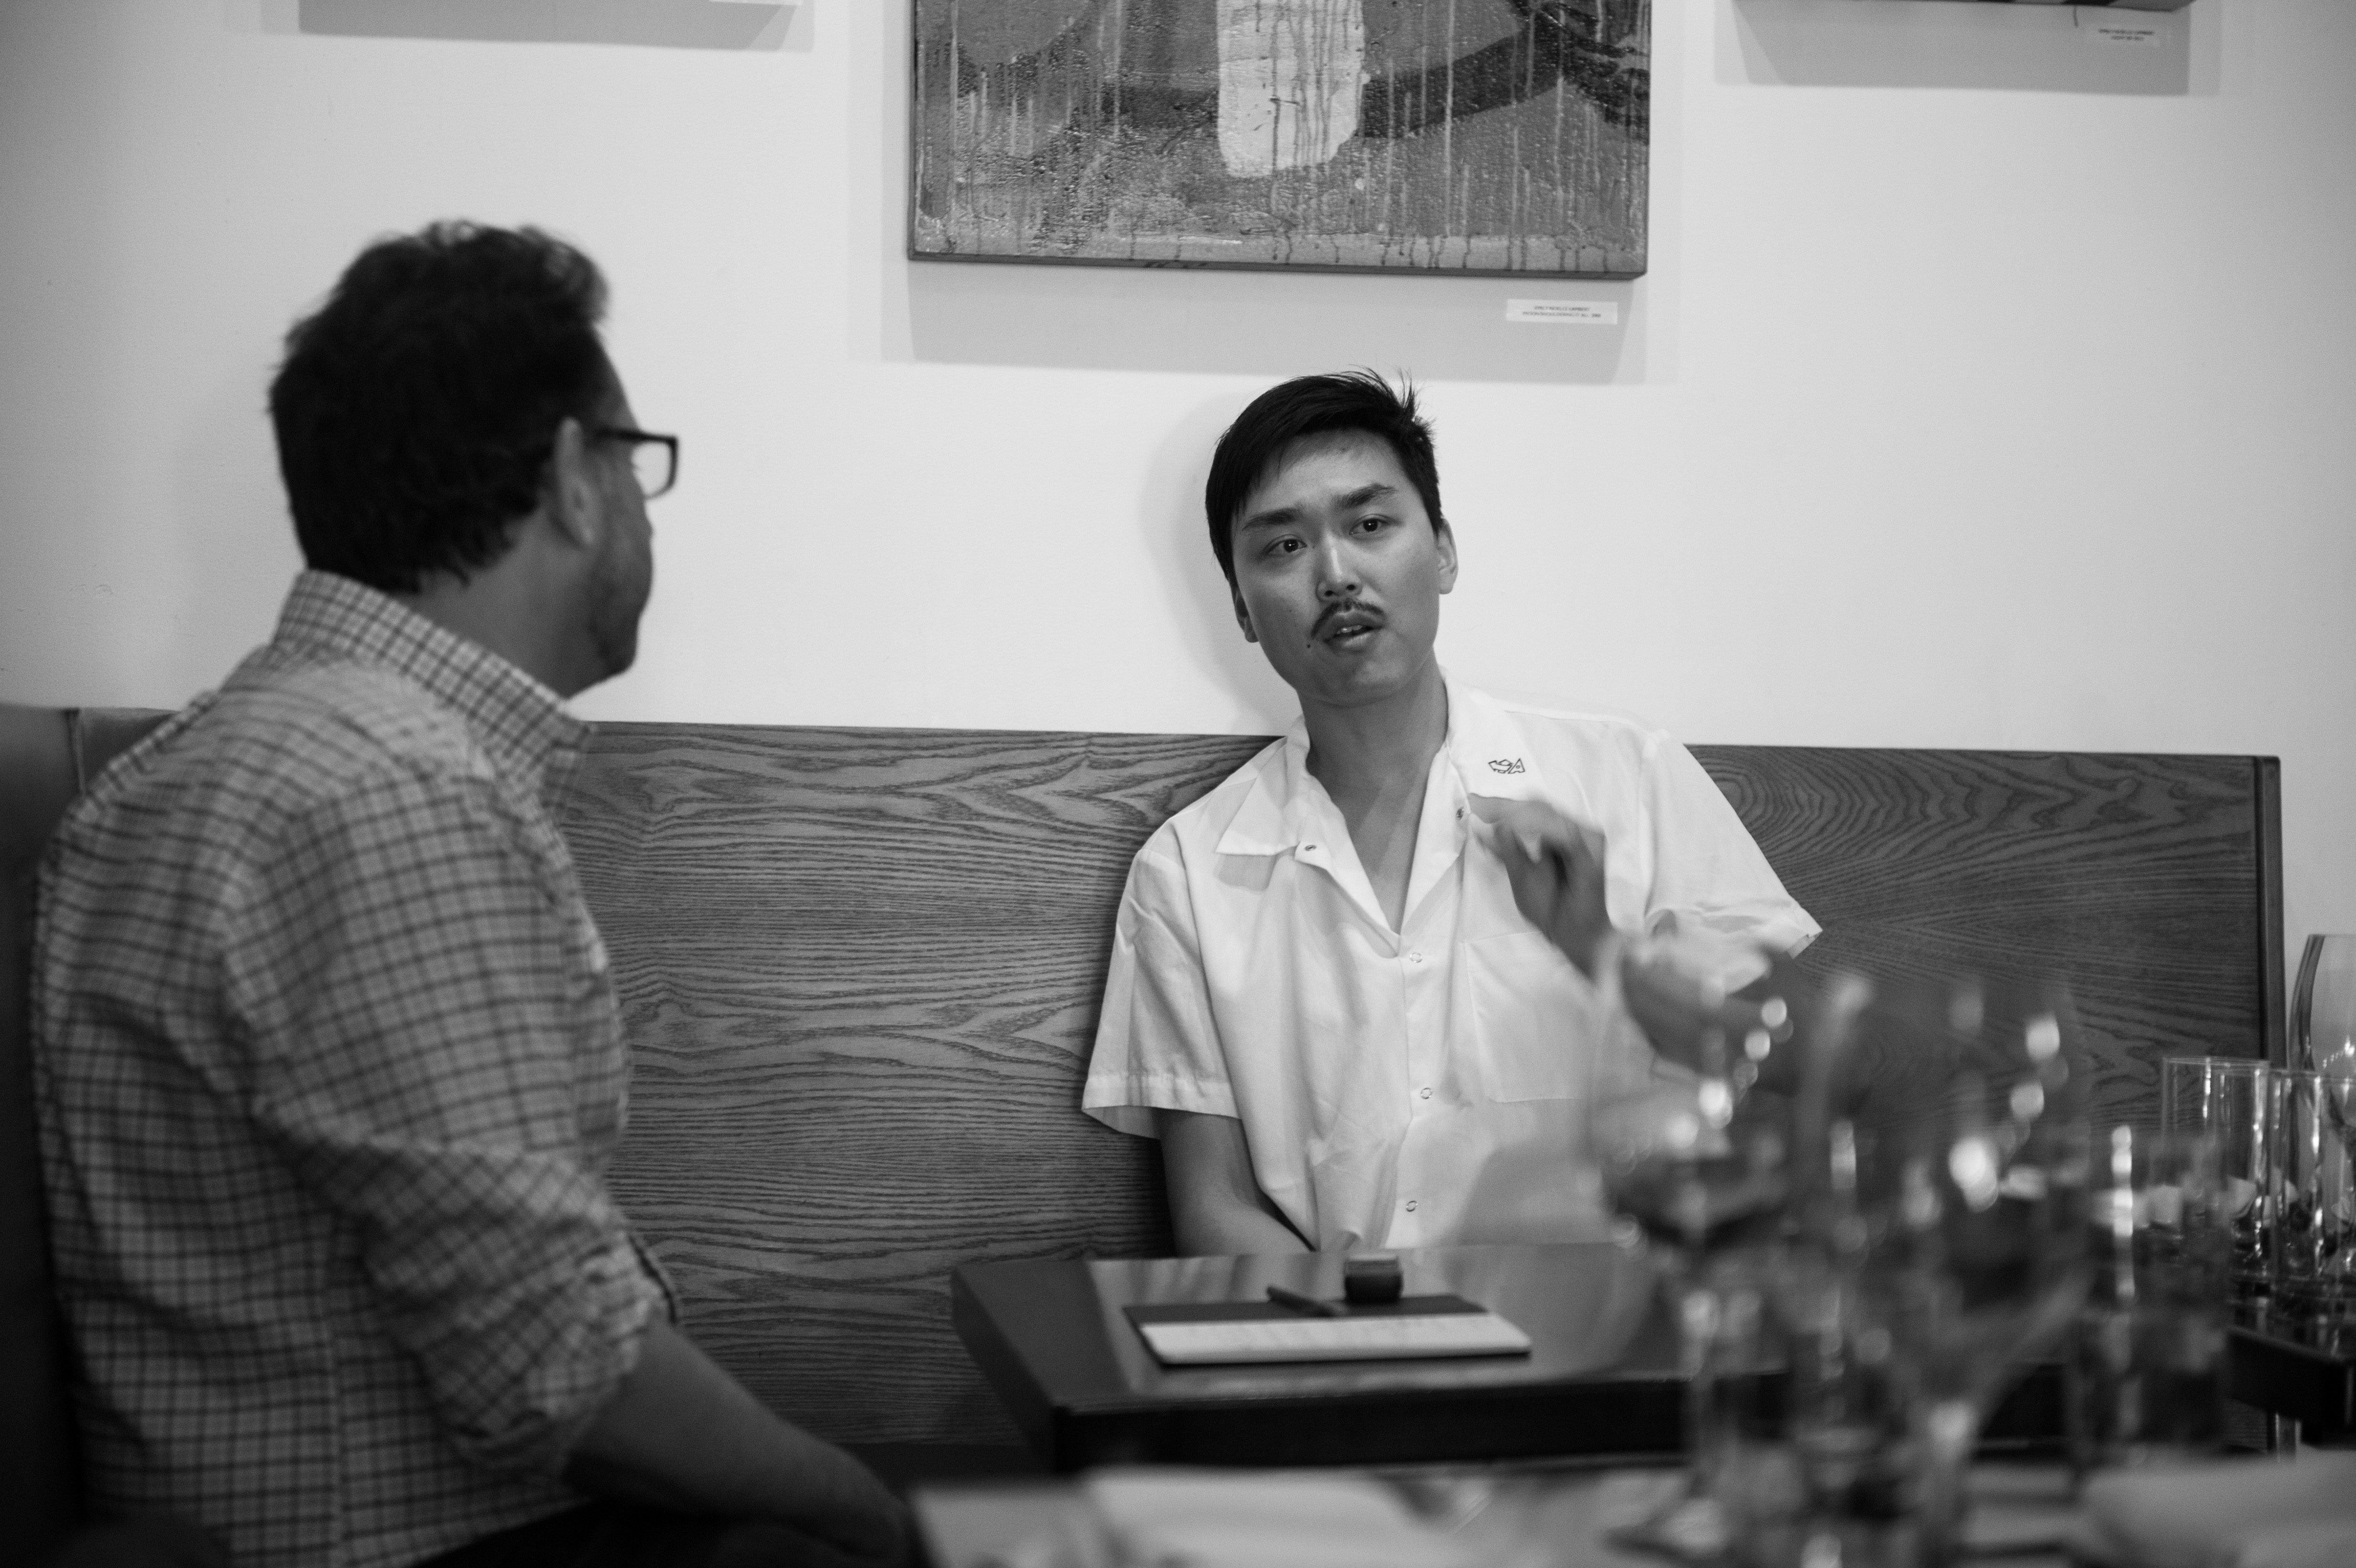 Jonathan Wu and the author at Fung Tu. (photo by Evan Sung)